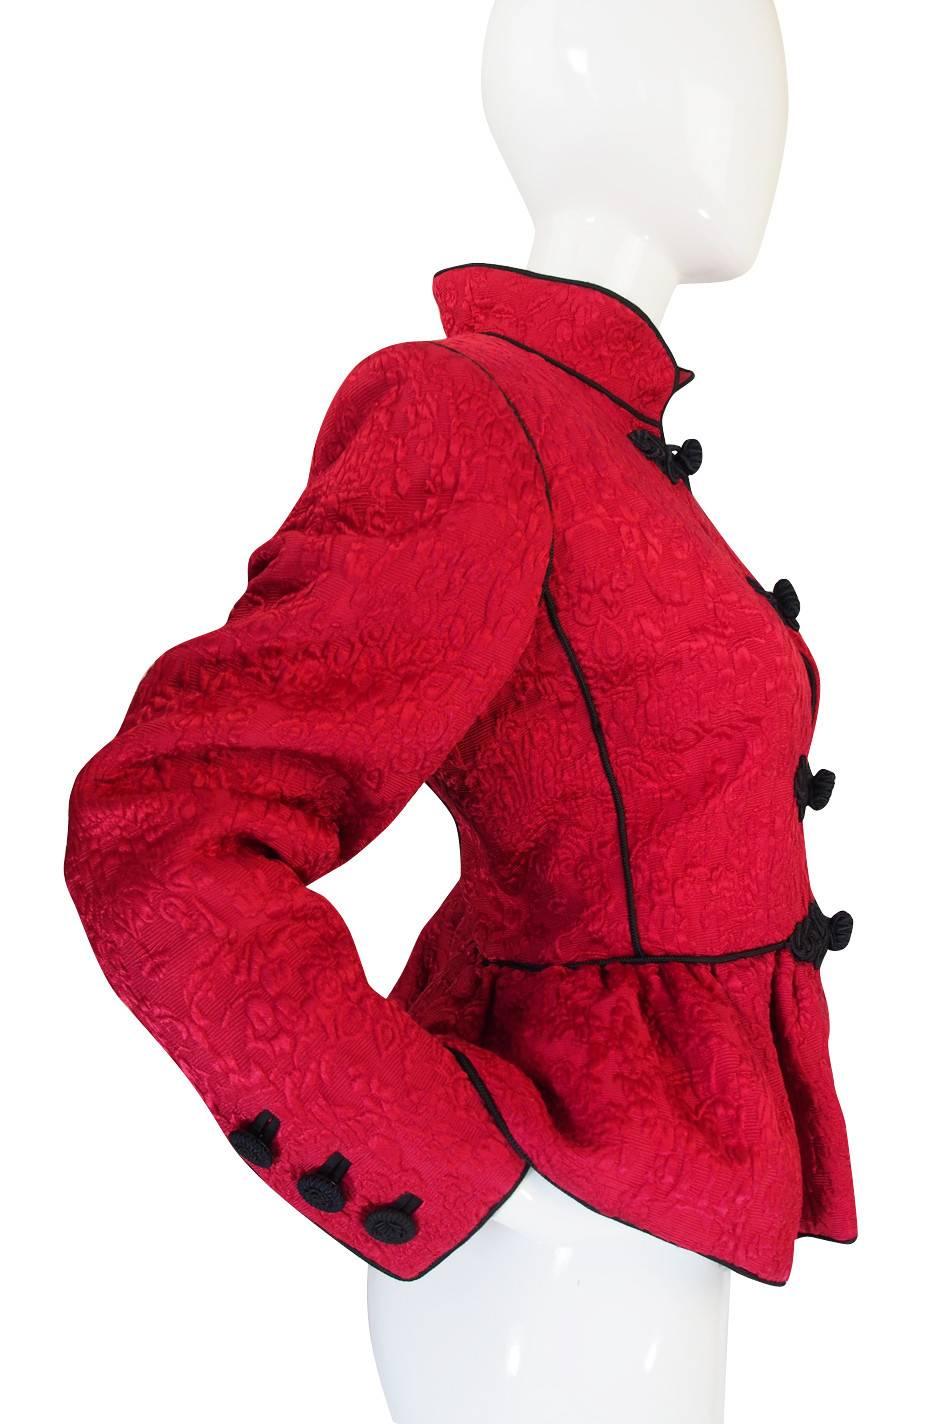 Women's Yves Saint Laurent Documented F/W 1990-91 Red Jacket